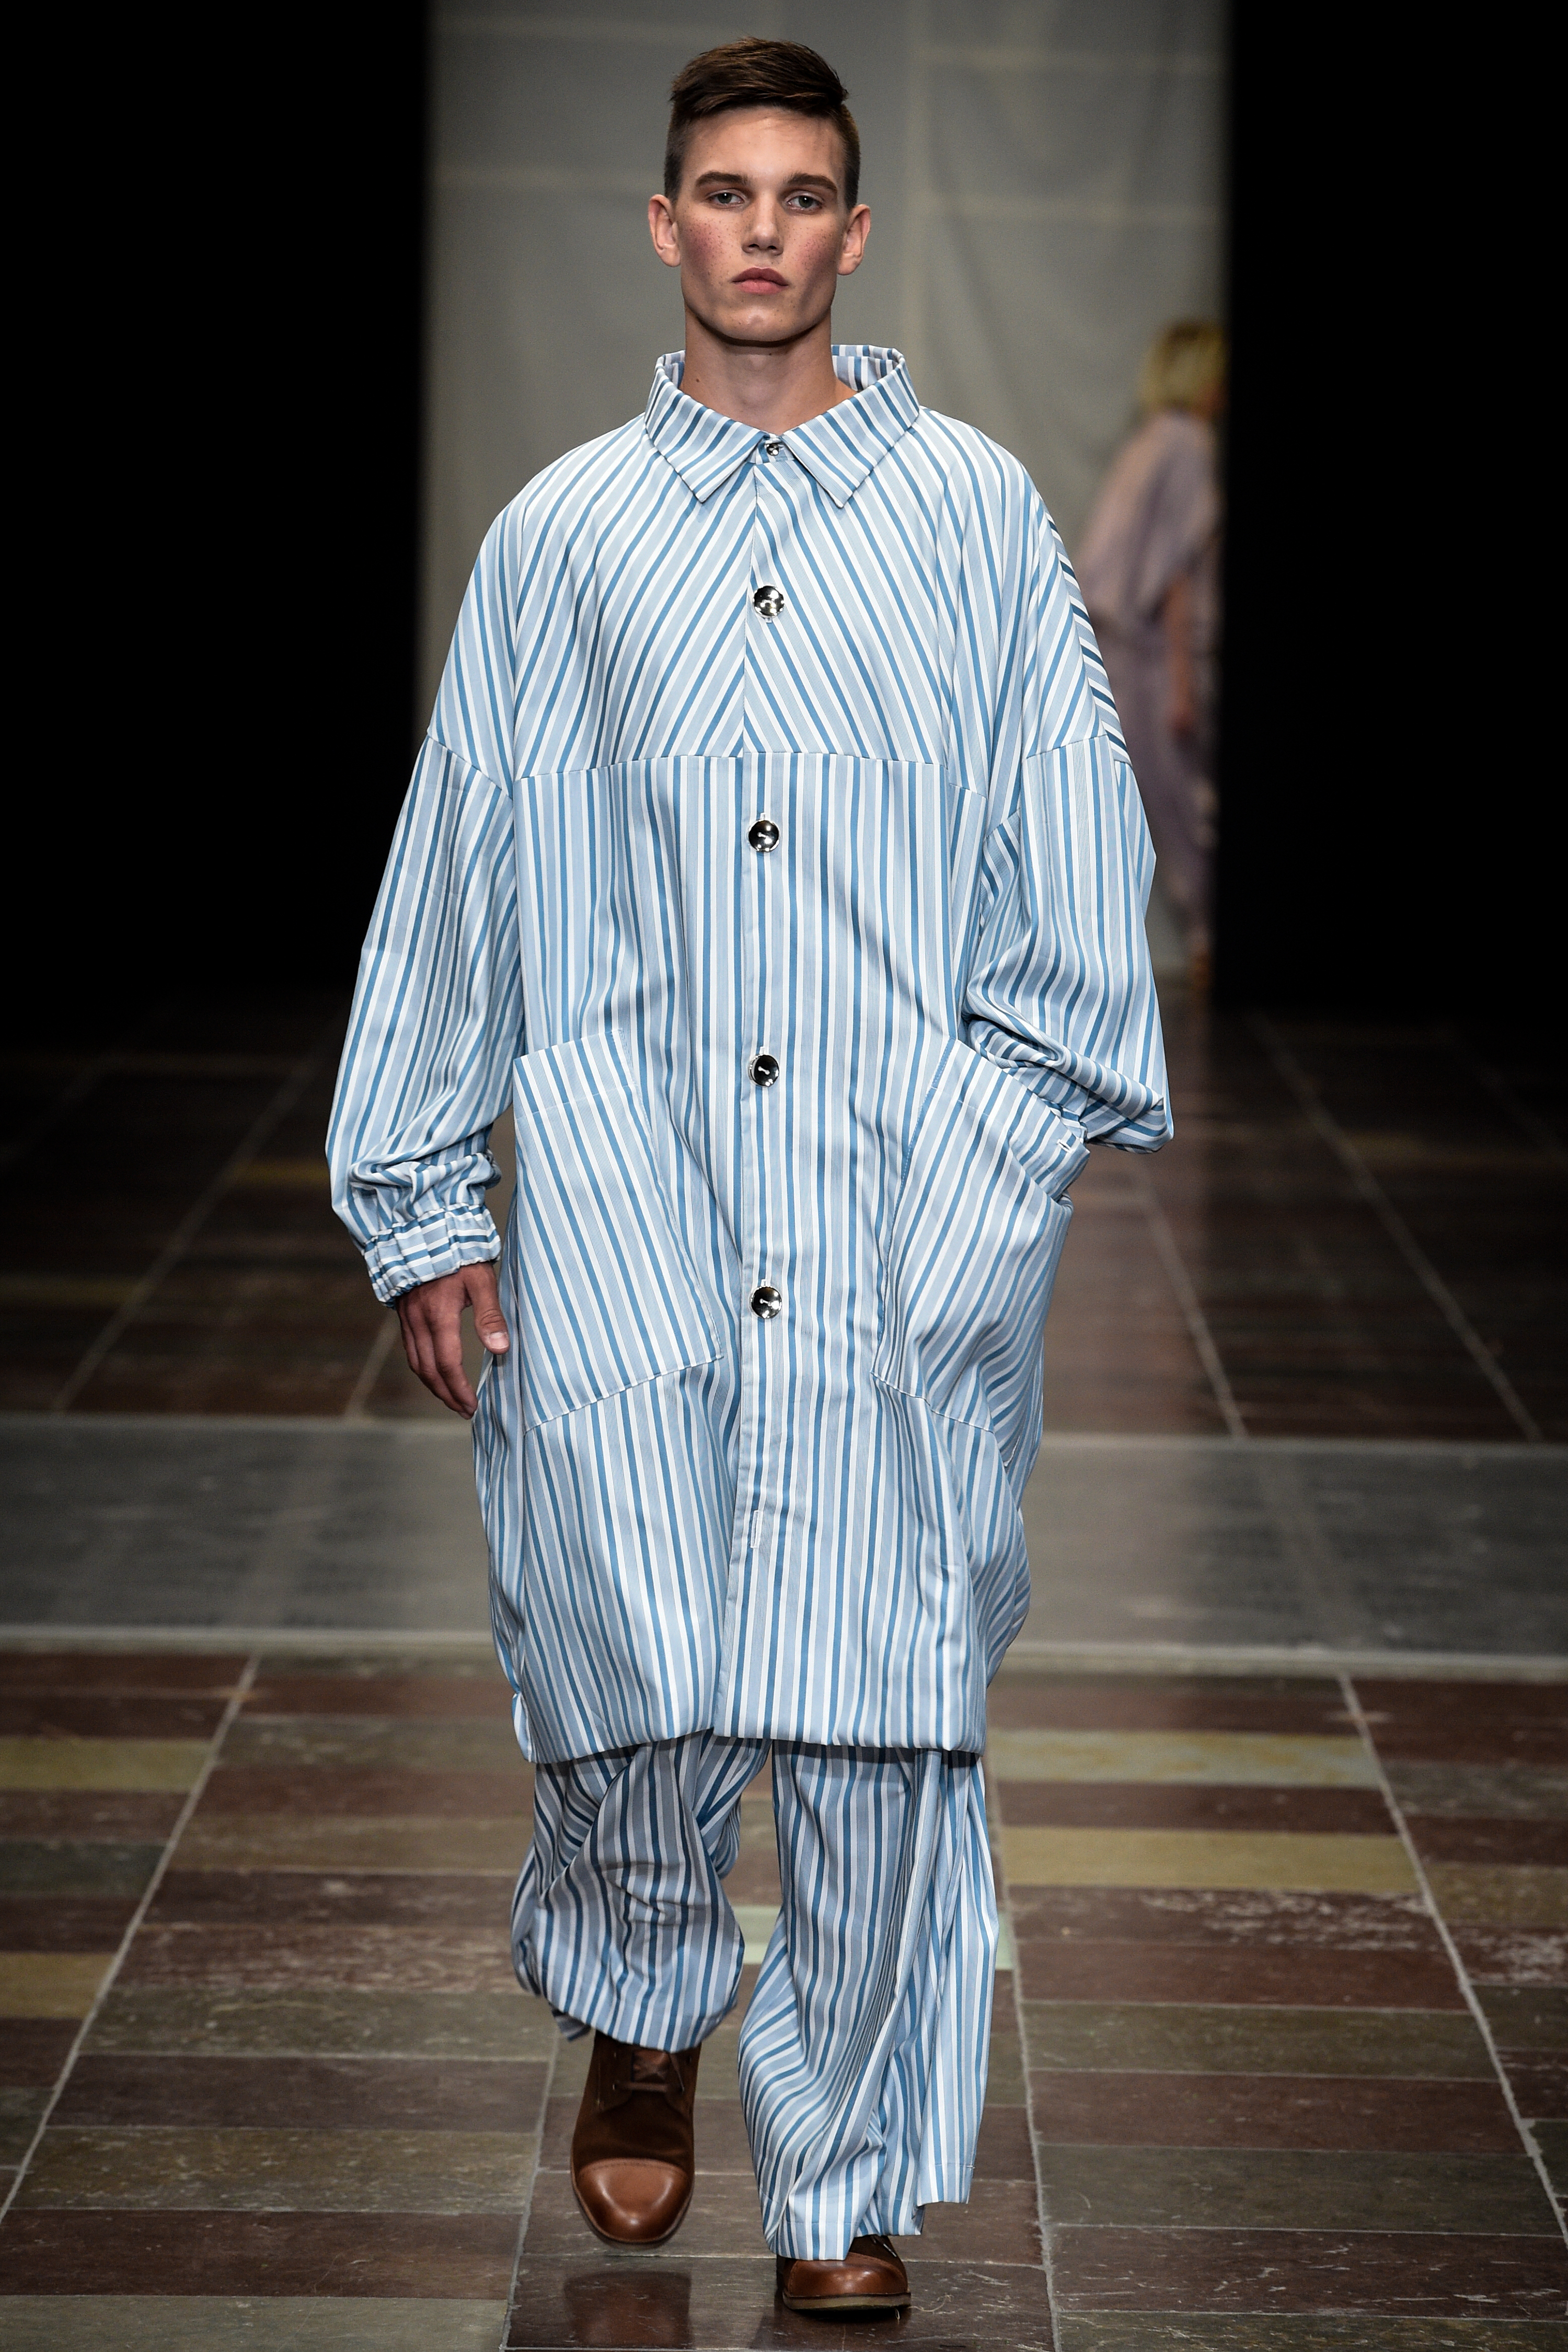 You are currently viewing NICHOLAS NYBRO SS16 SQ1